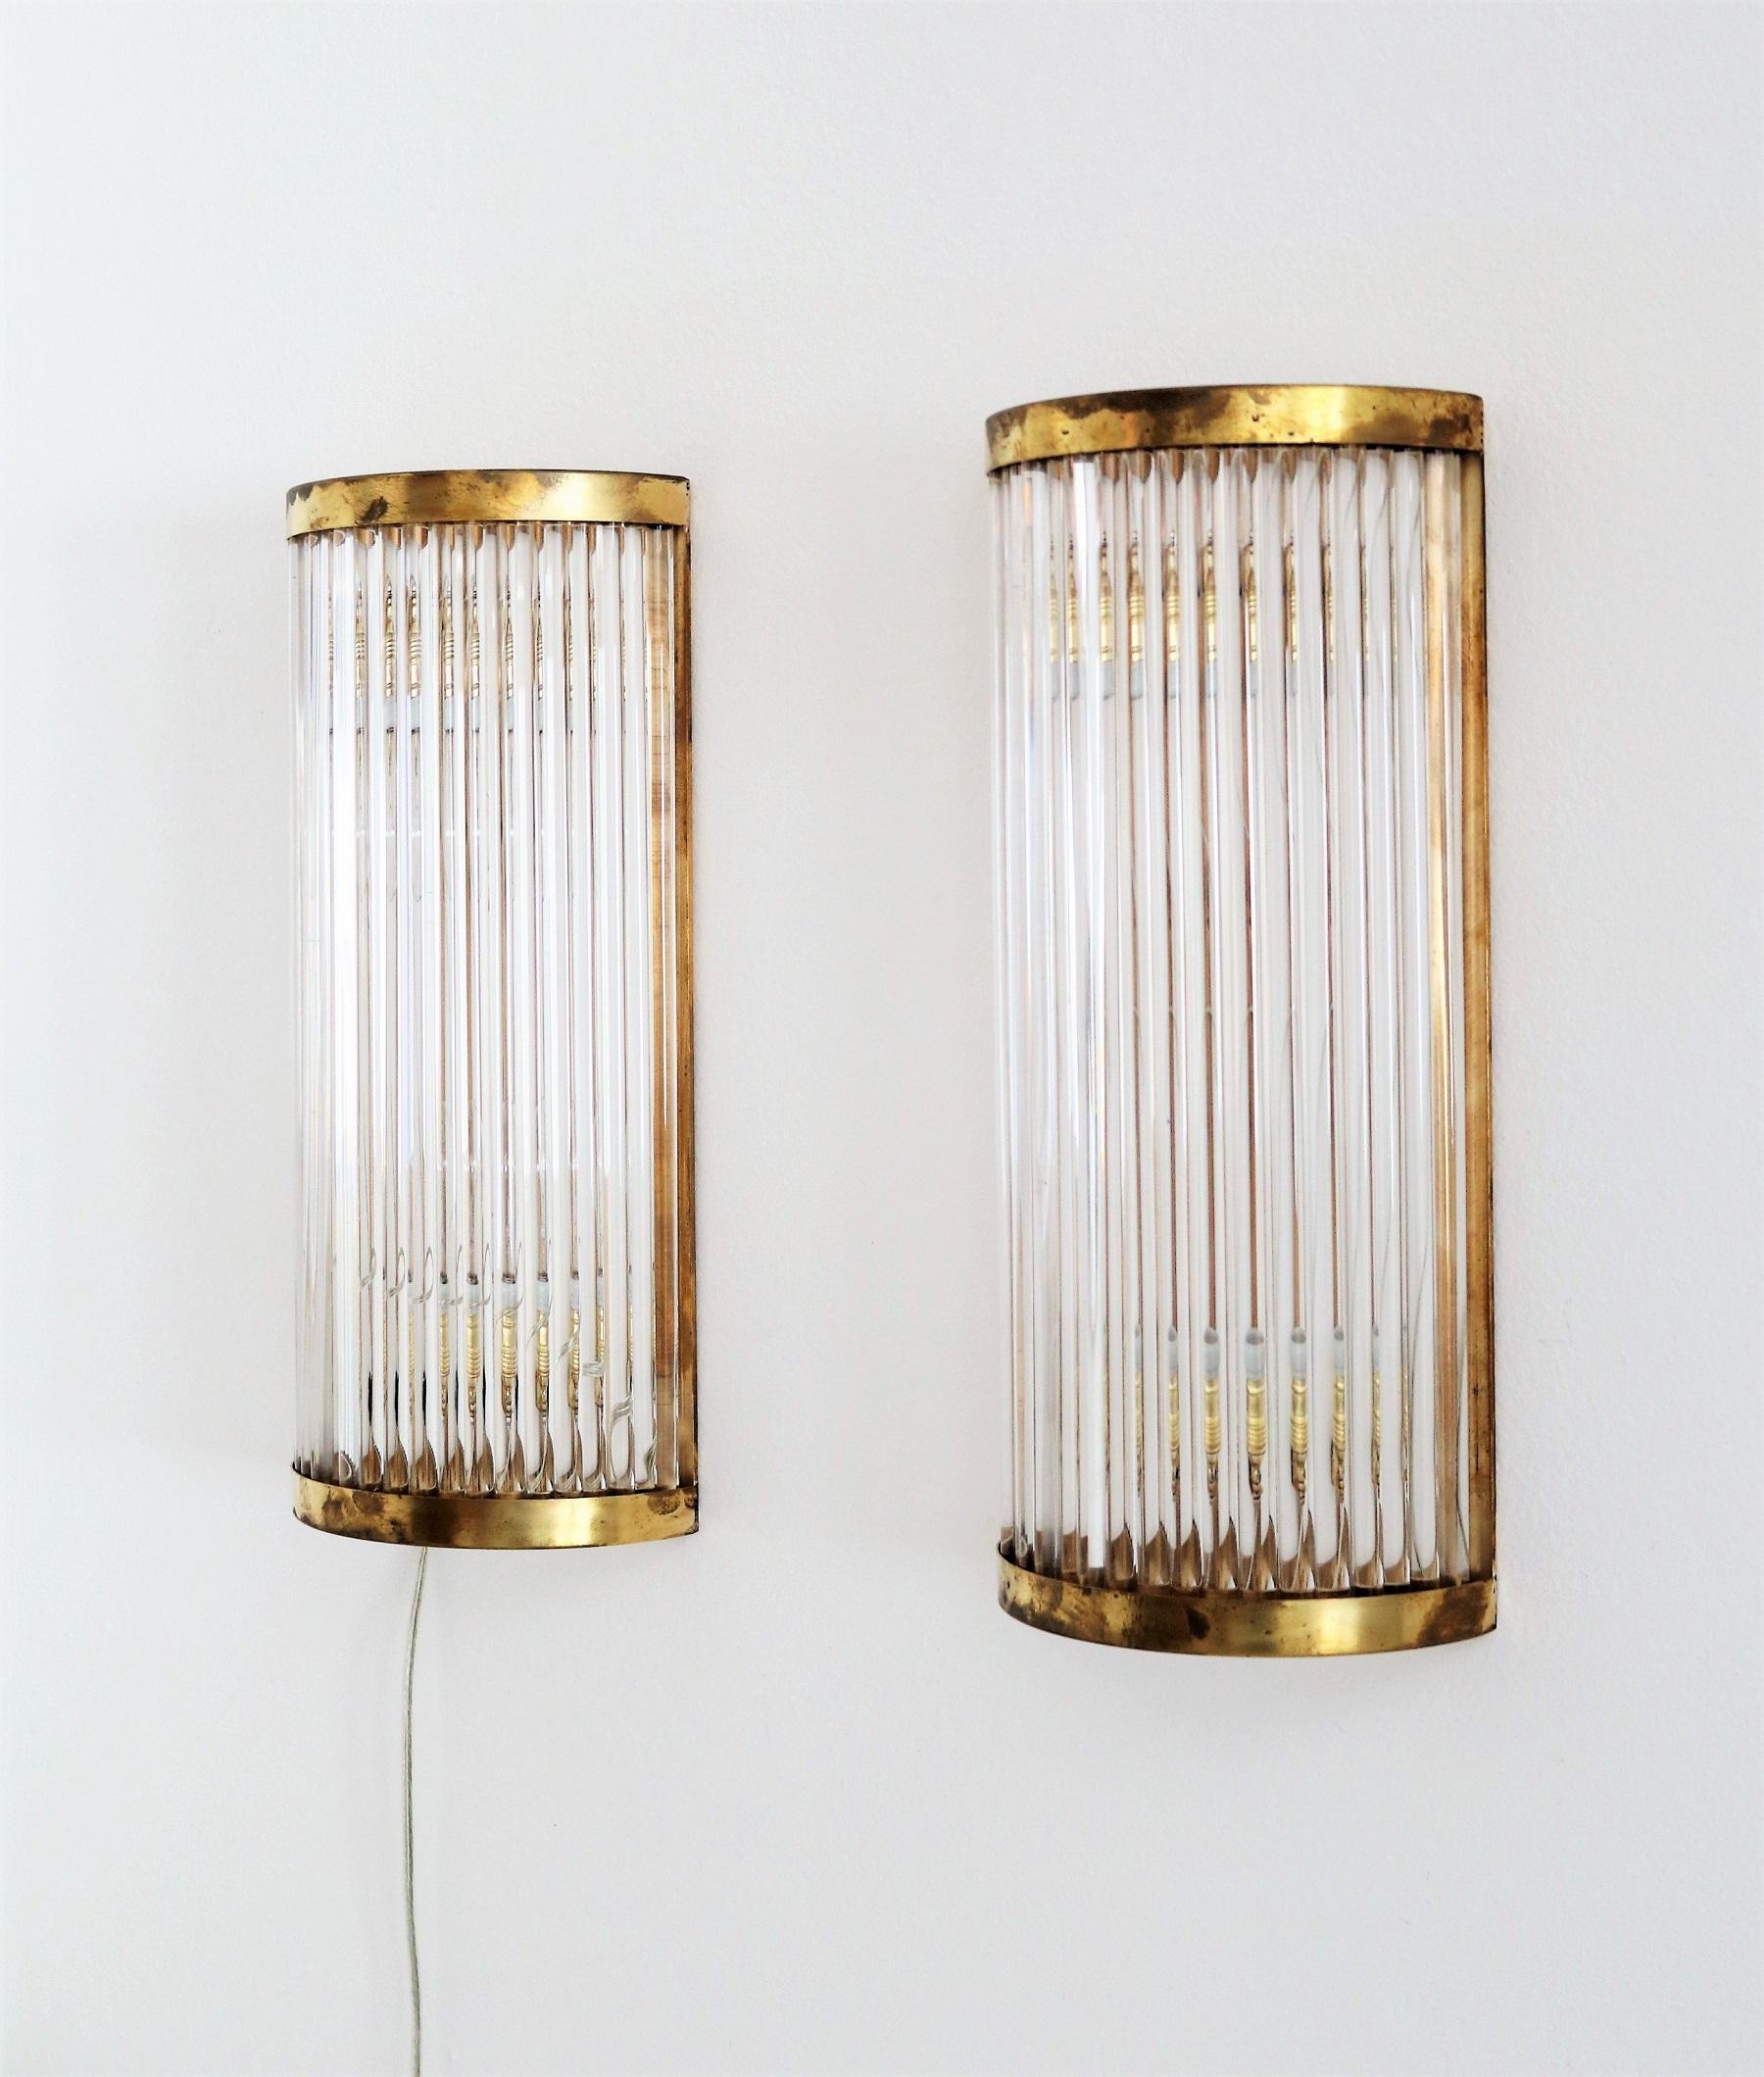 Hand-Crafted Italian Art Deco Style Murano Wall Sconces with Glass Rods and Brass